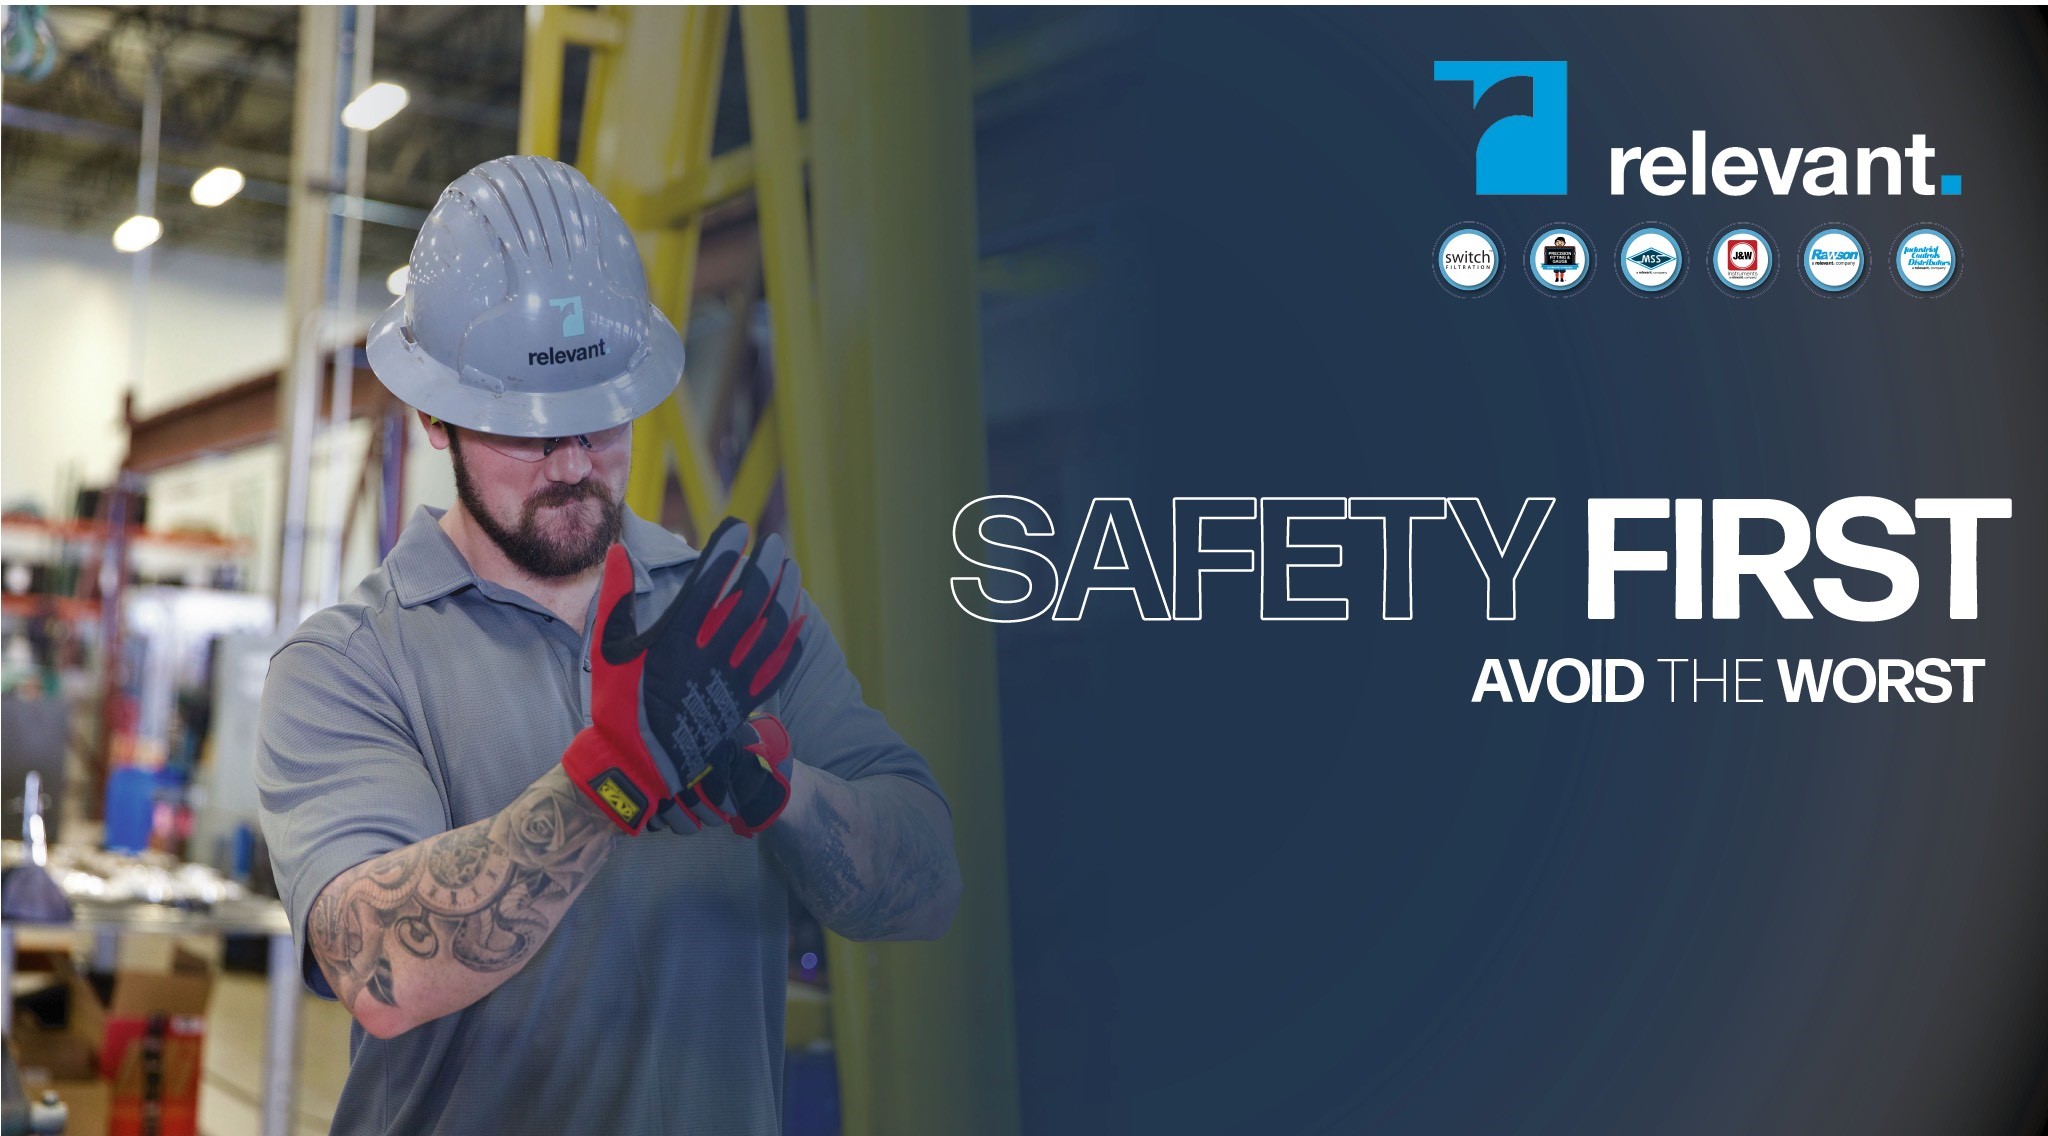 SAFETY-FIRST-AVOID-THE-WORST